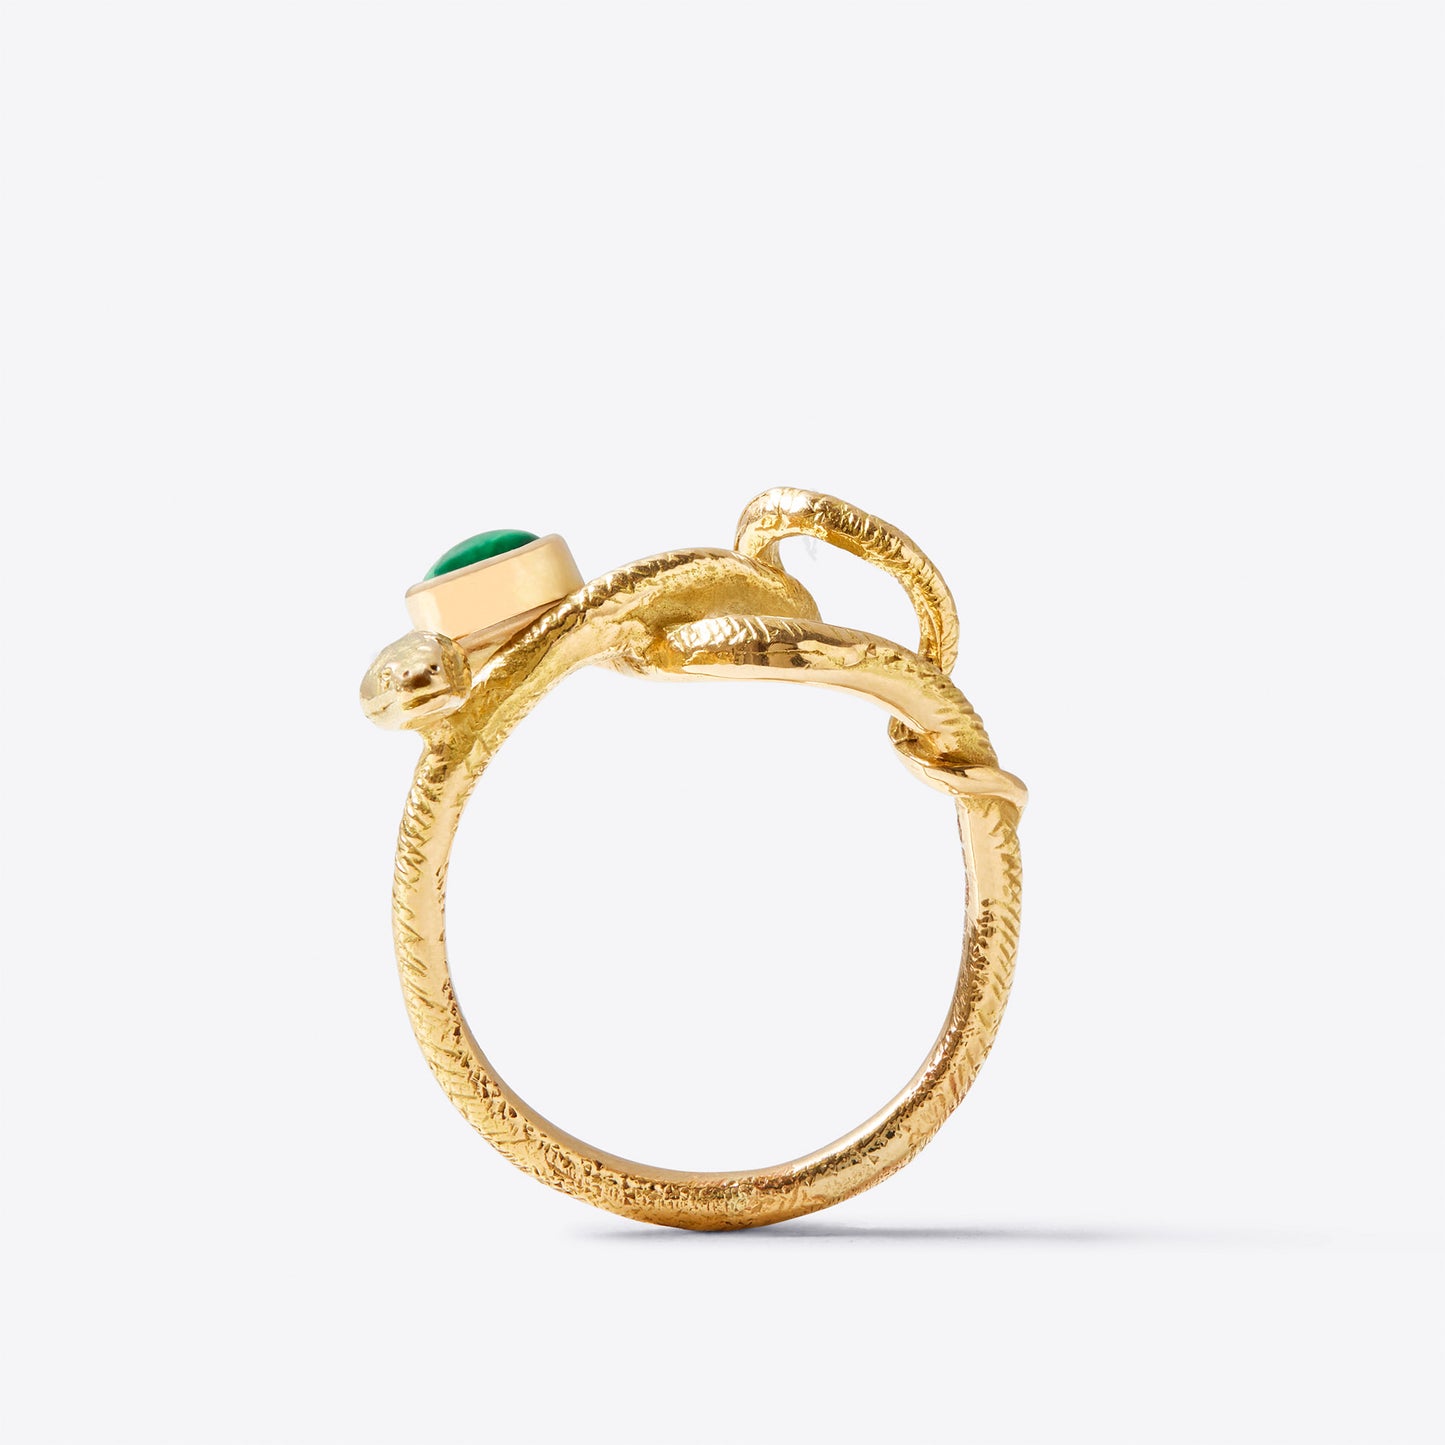 Gold Wadjet Twisted Snake Ring with a Malachite Stone